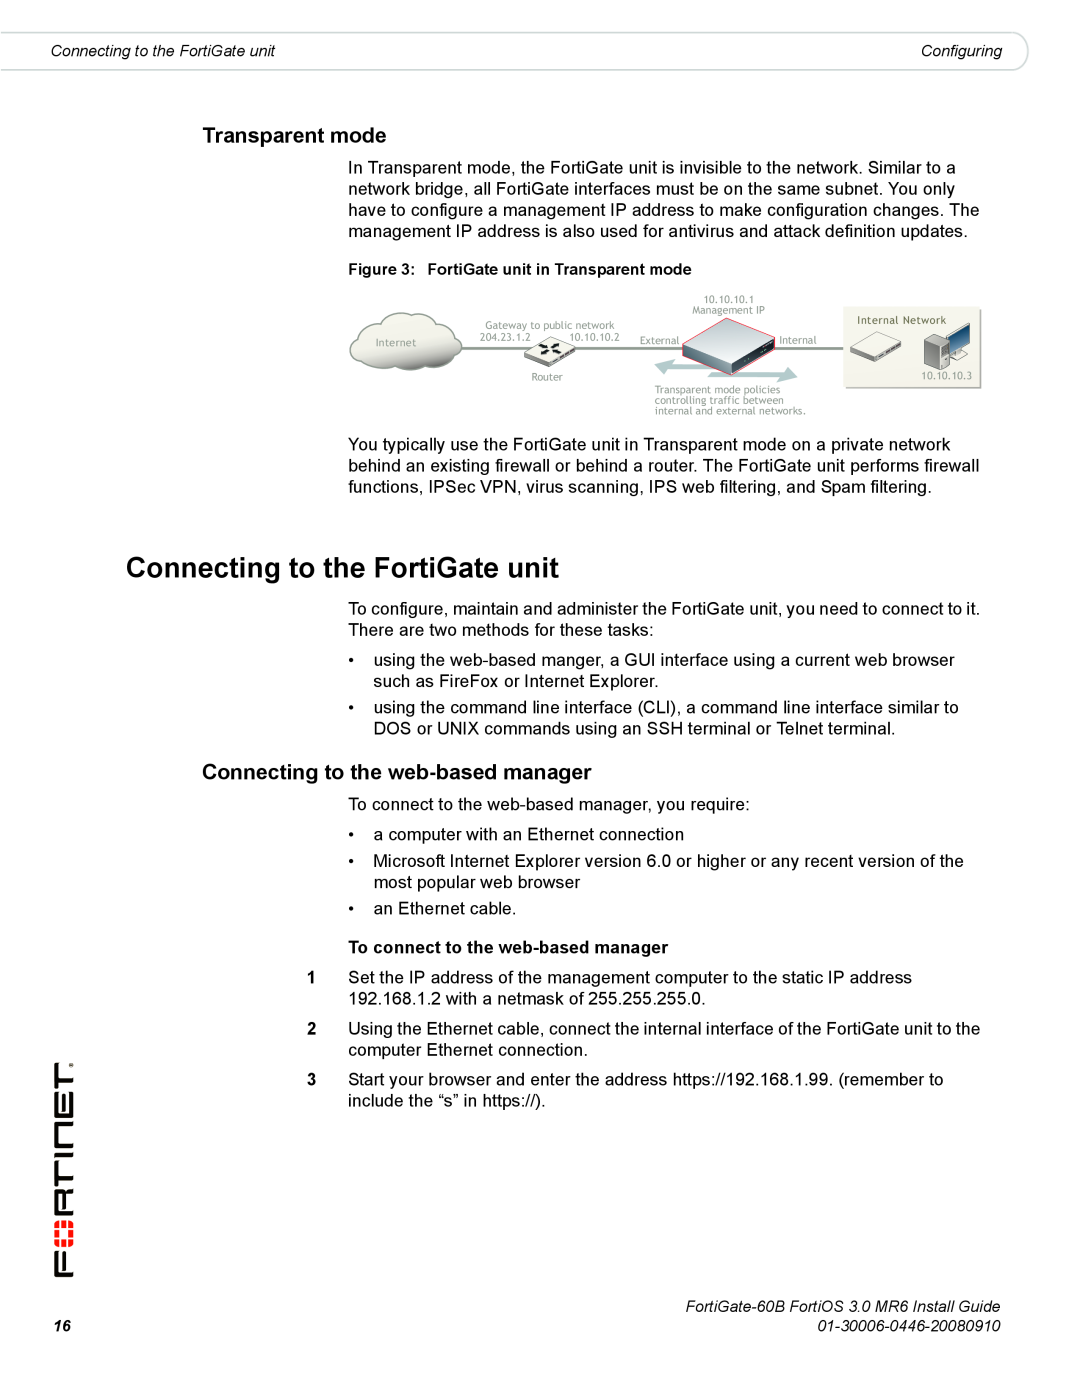 Fortinet 60B manual Connecting to the FortiGate unit, Transparent mode, Connecting to the web-based manager 